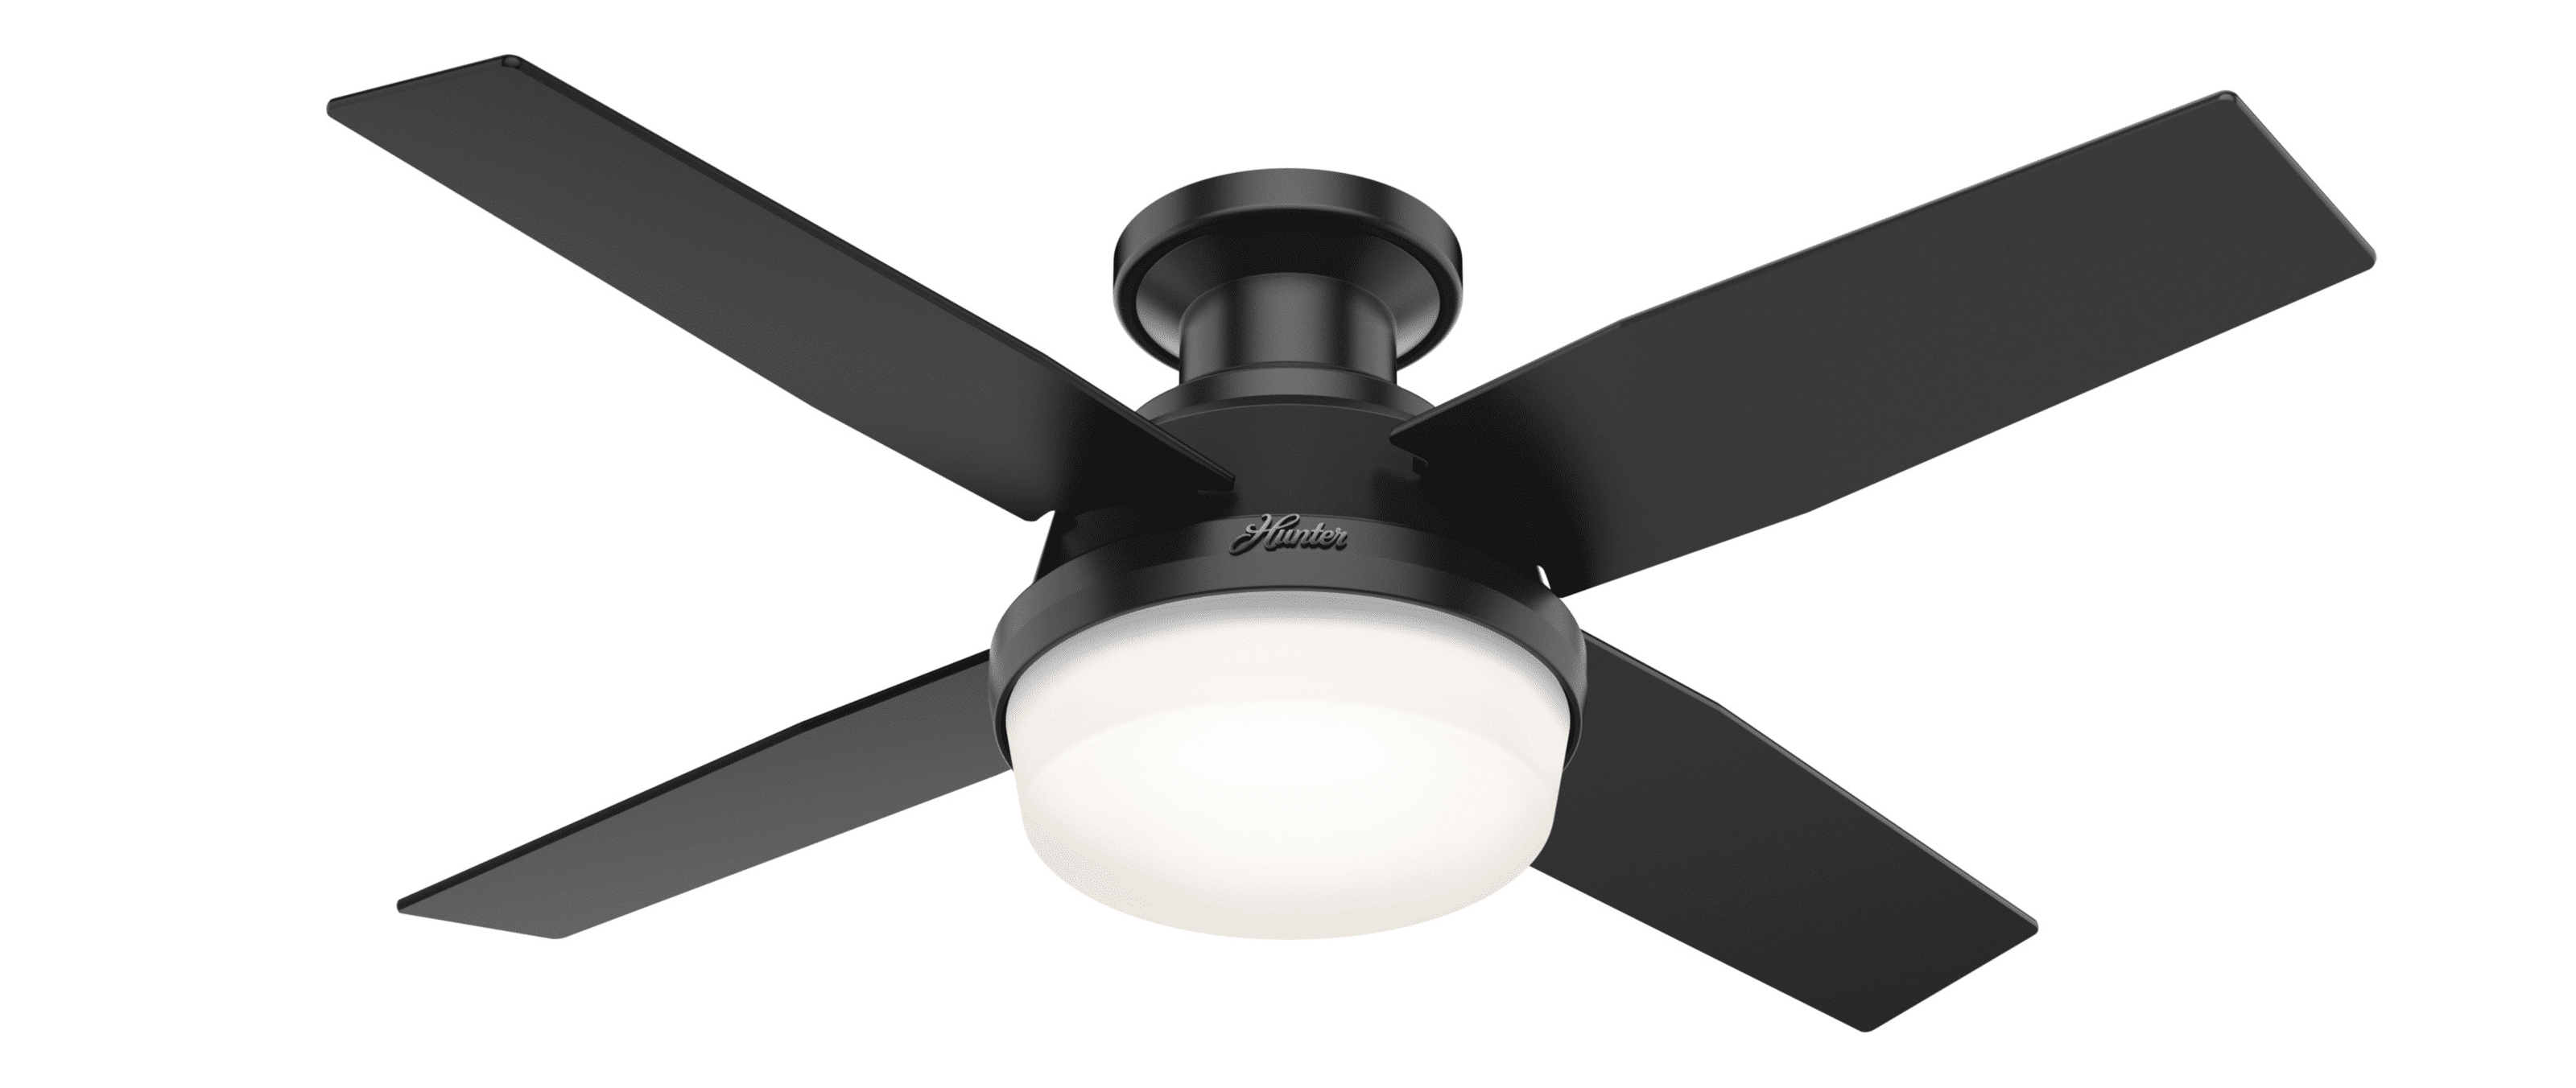 low profile kitchen ceiling fan with light